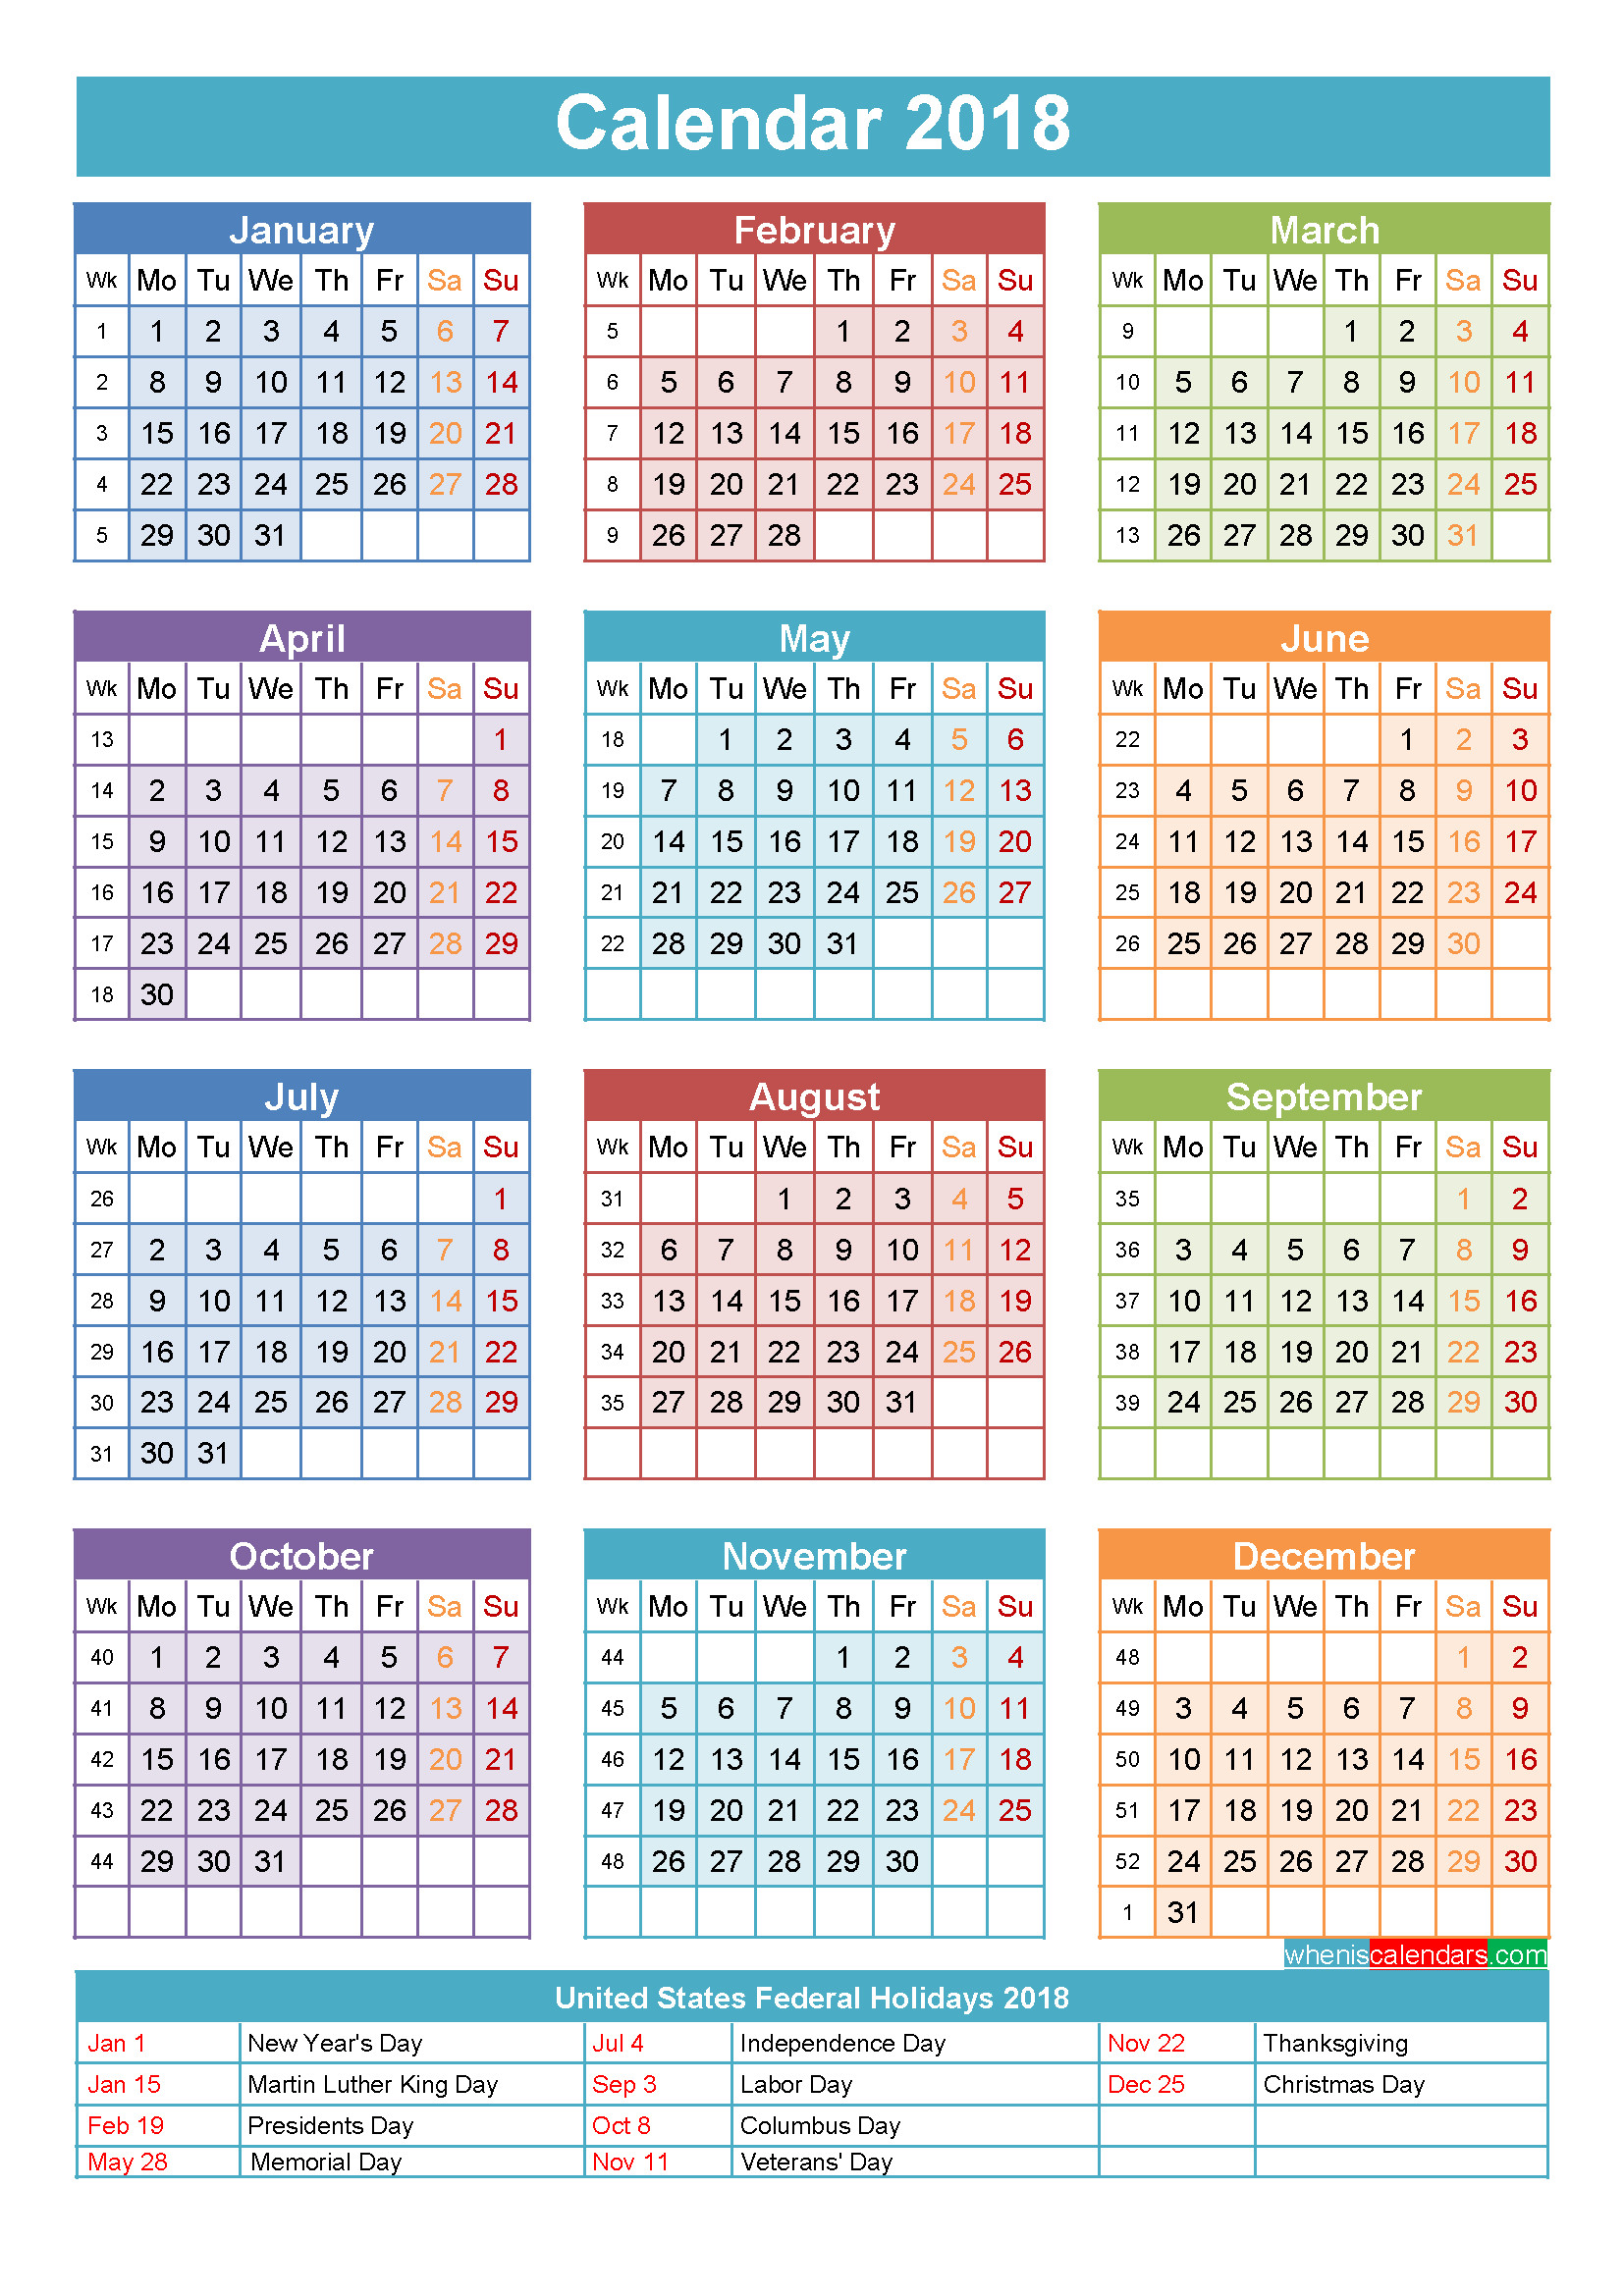 Wallpaper Calendars for 2018 61 images 1654x2339